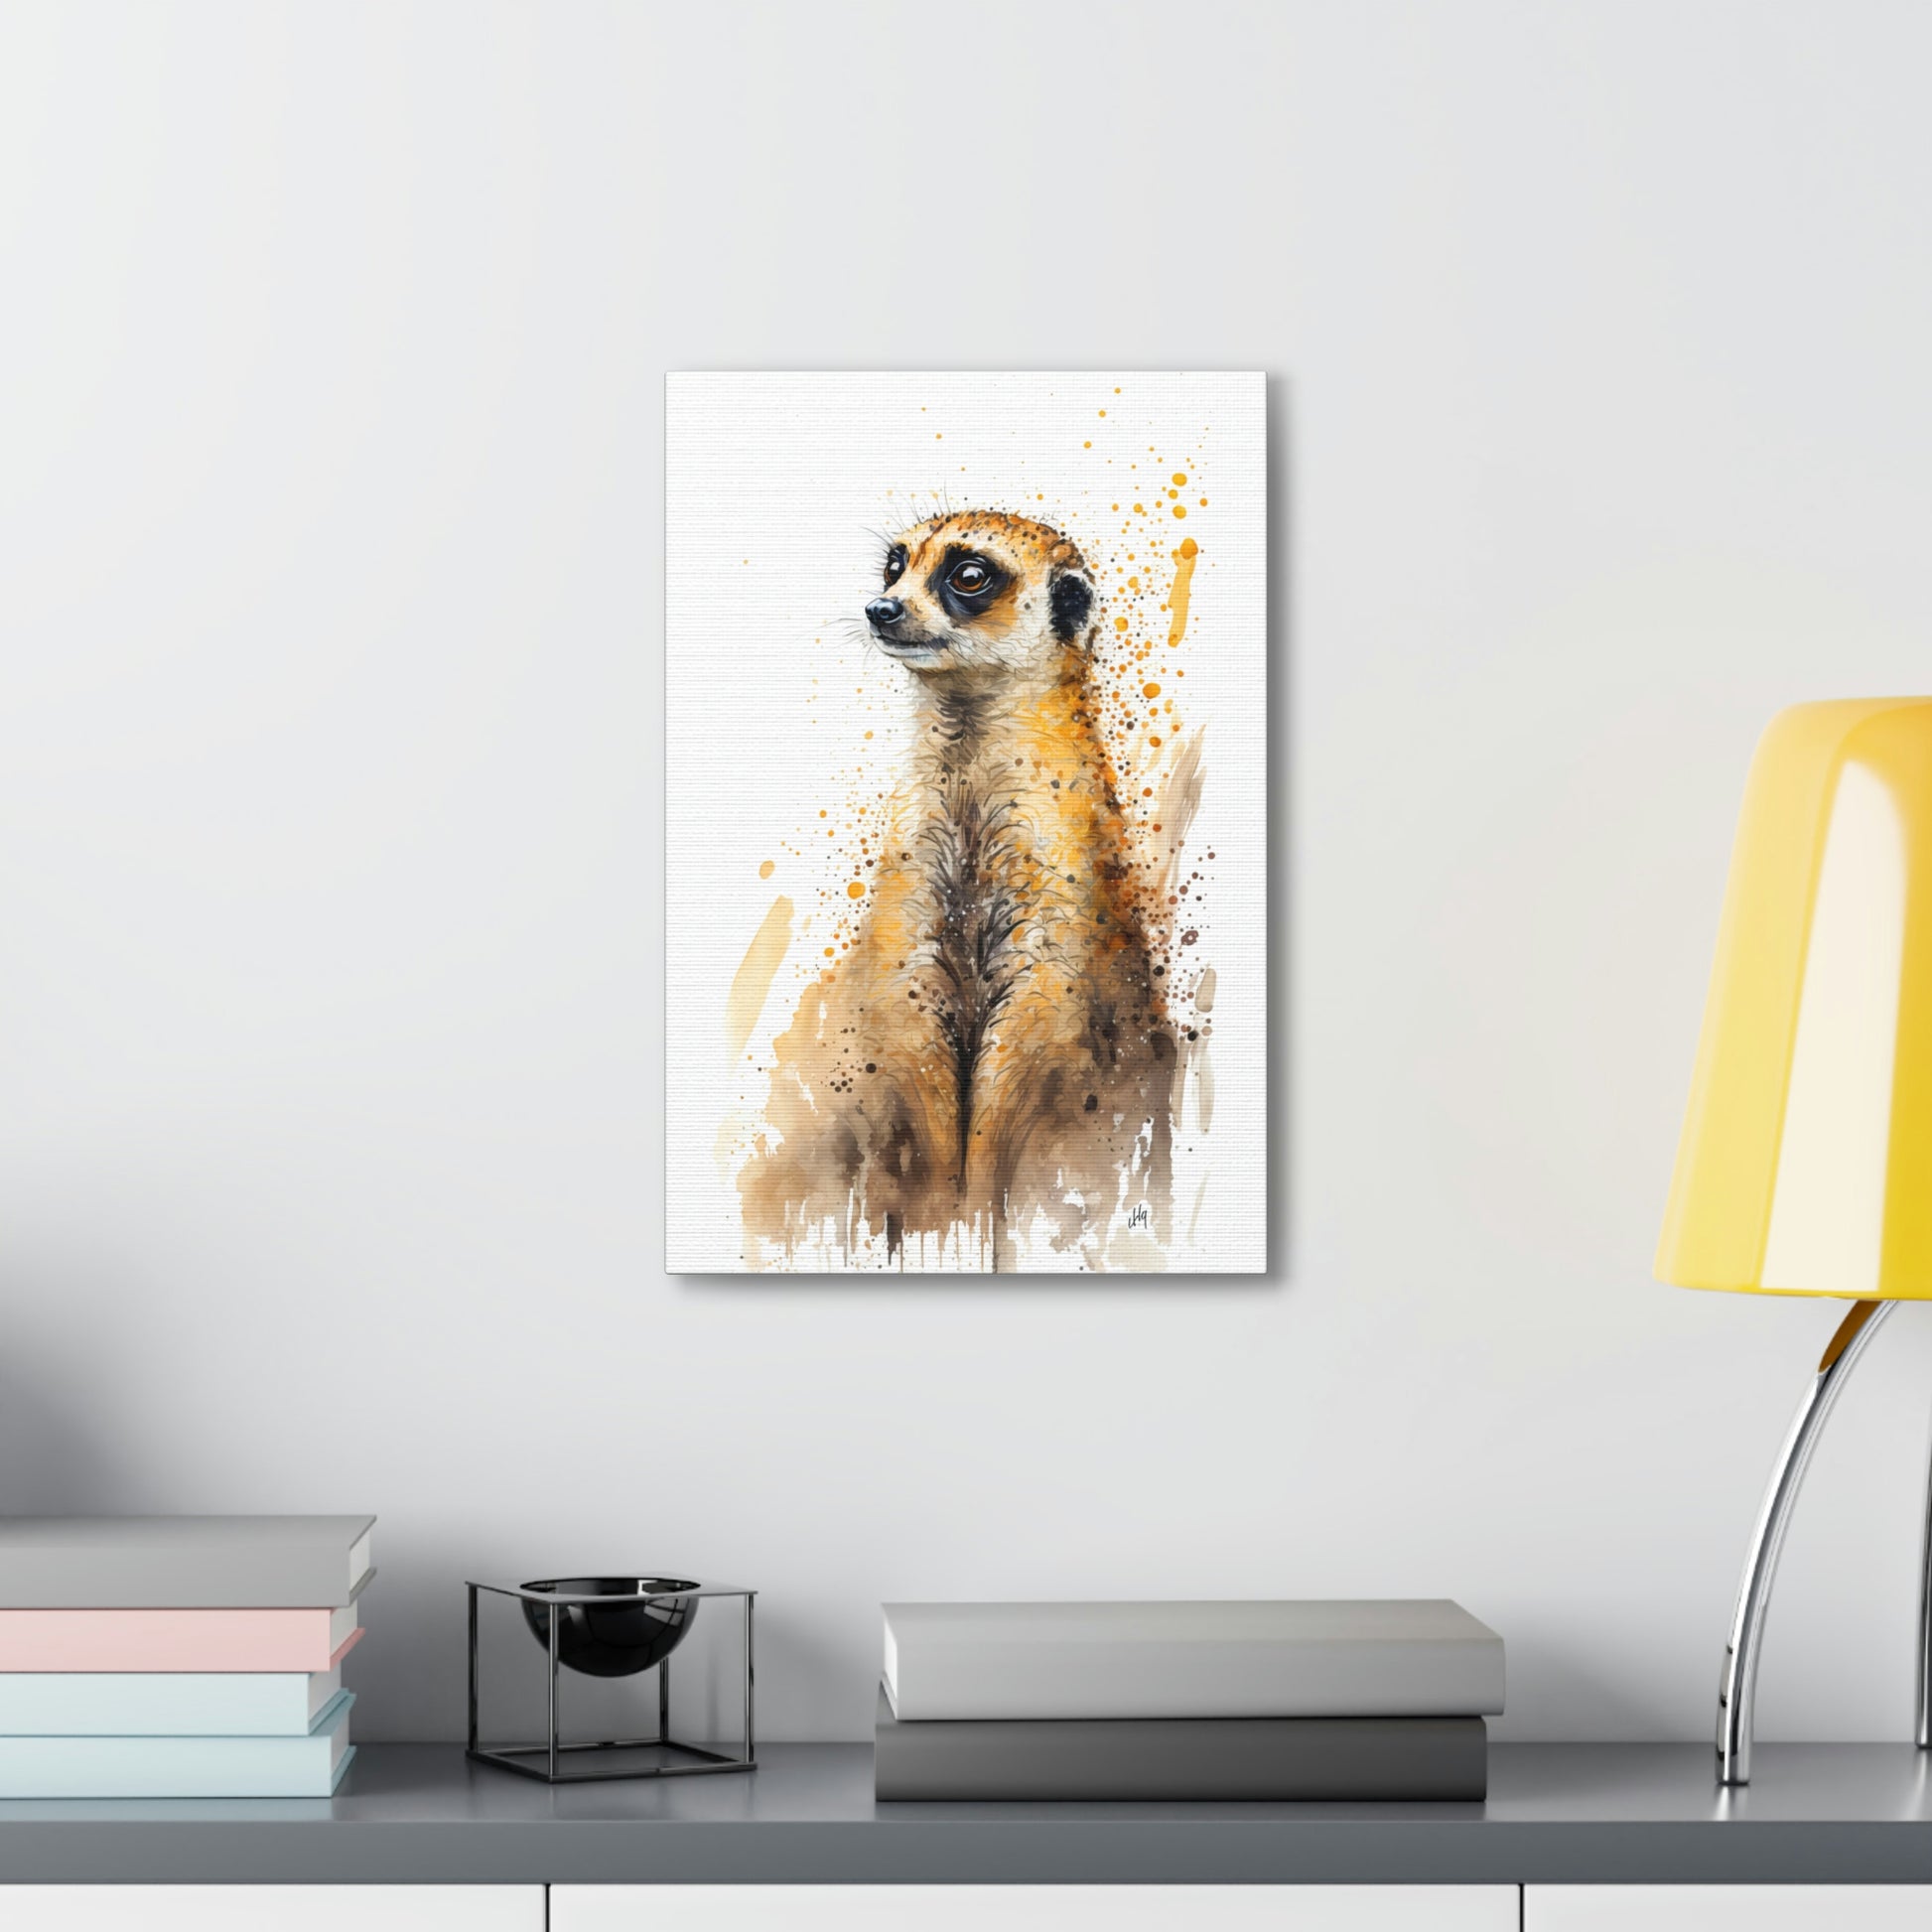 Meerkat Wall Art from the Wildlife Collection, an expressive portrayal on canvas, bringing to life the curious and watchful nature of this desert dweller. A treasure for those who appreciate distinctive wall art, nature-themed gallery showcases, memorable canvas artworks, and a touch of the wild in contemporary home interiors.